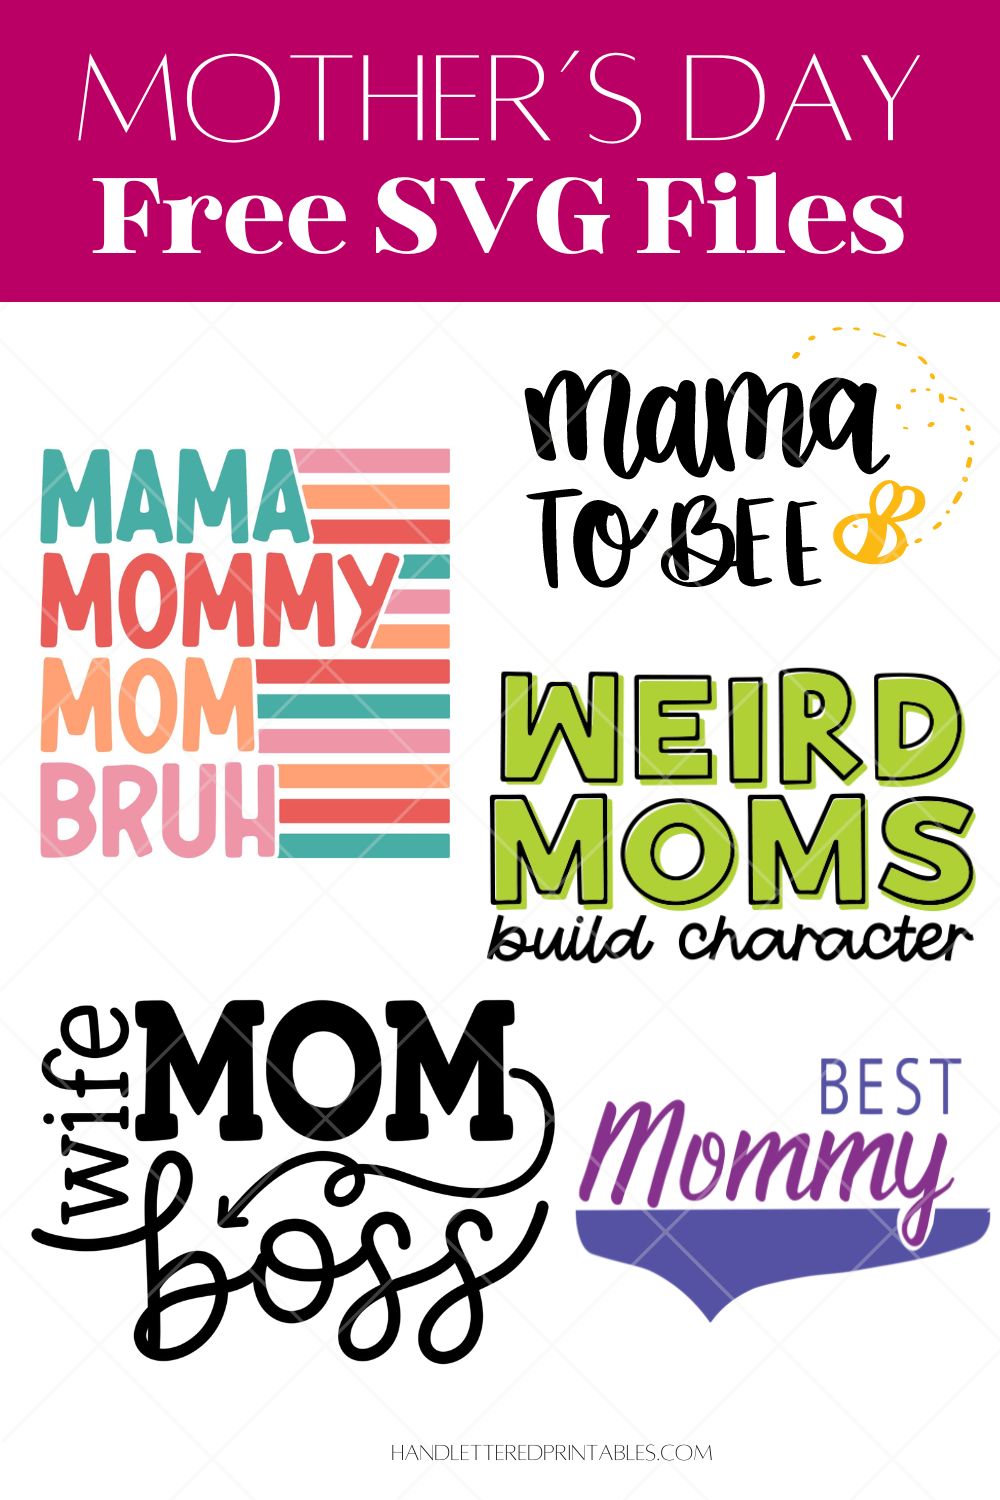 5 Free SVG files for Mother's Day collage of all cut files with title text that reads: mother's day free SVG files